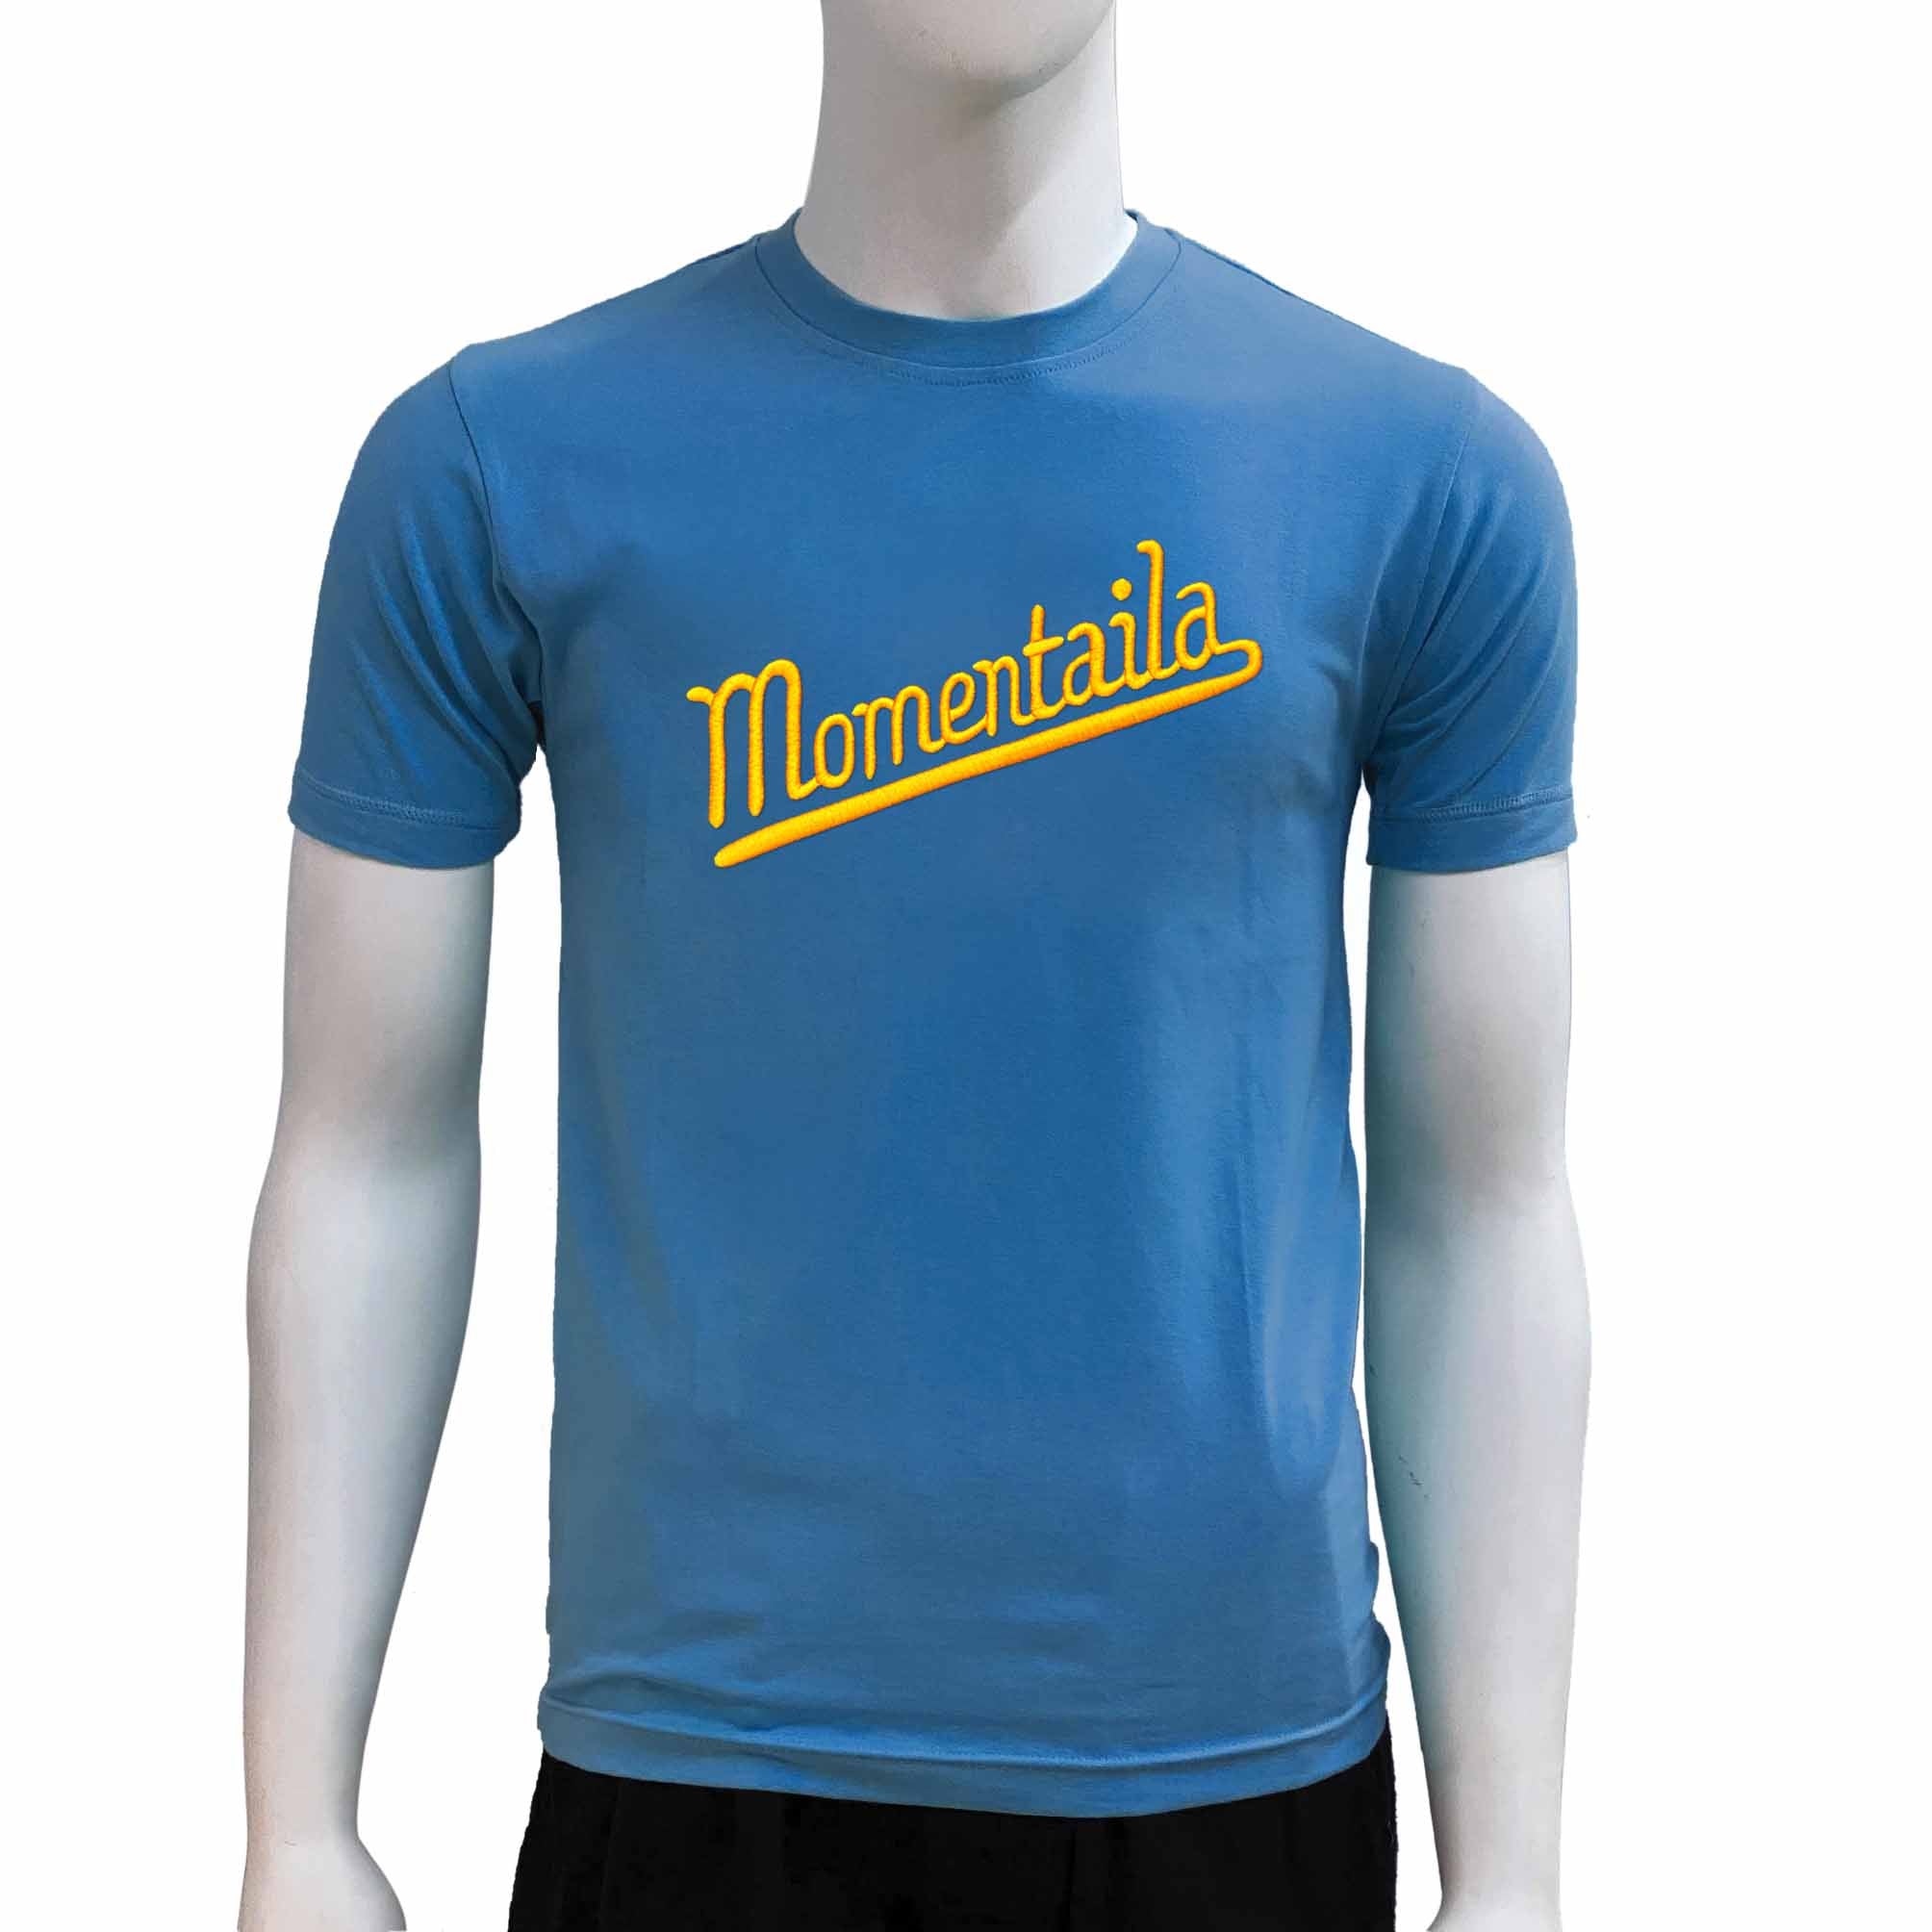 Momentaila Embroidered Tee, Stone Blue